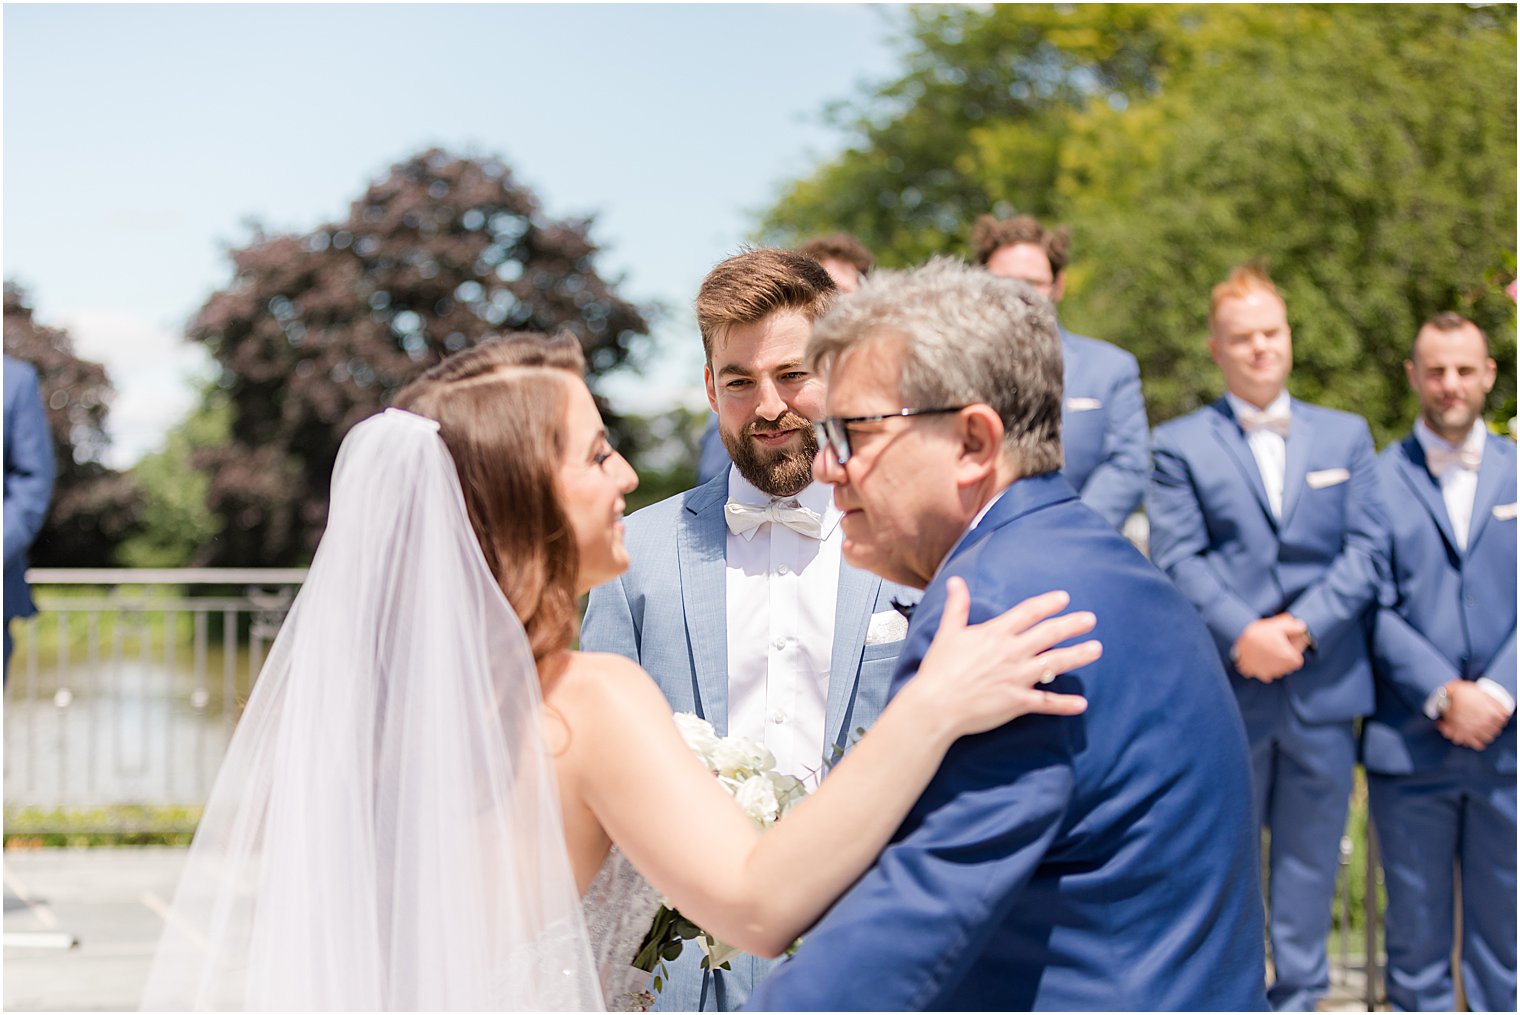 dad gives away bride during summer wedding ceremony at Park Chateau Estate